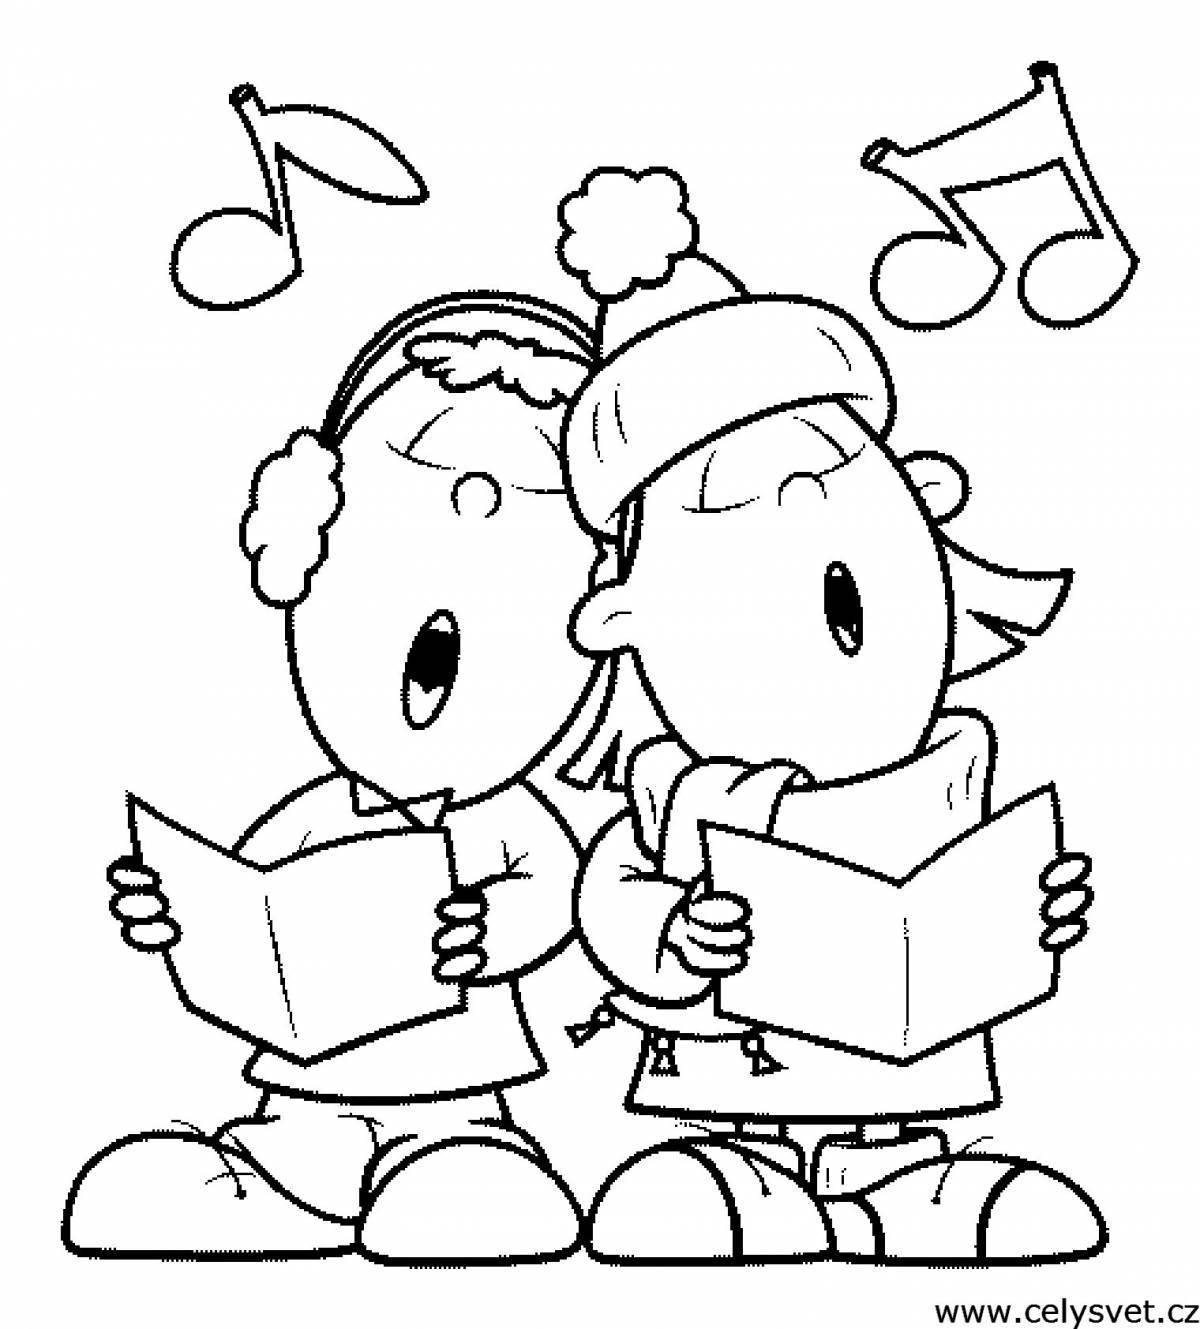 Brightly colored singing coloring book